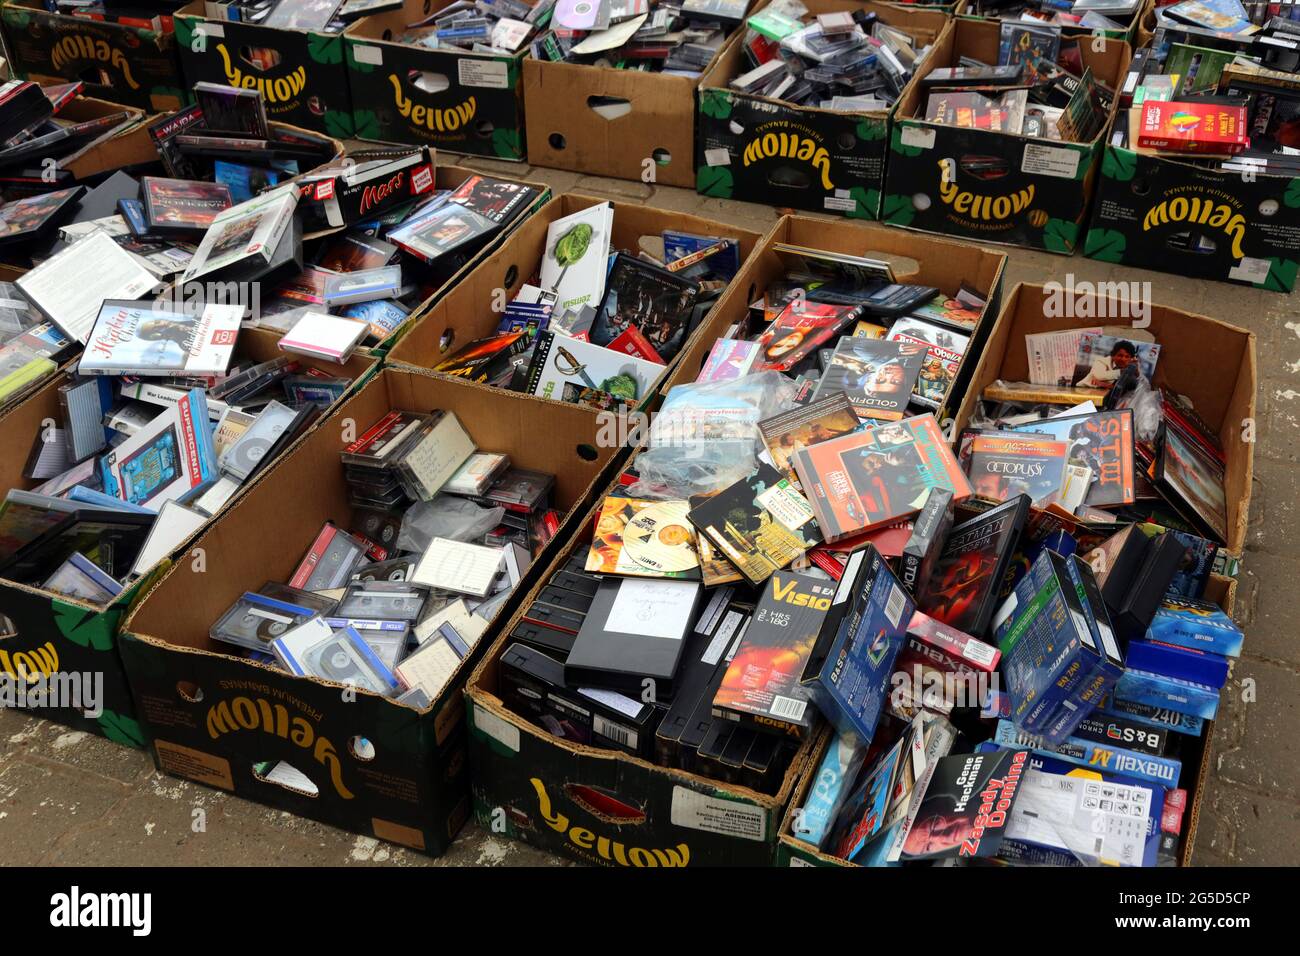 Flea market stand. Boxes full of old cassettes. Audio, VHS, CD, DVD. Stock Photo